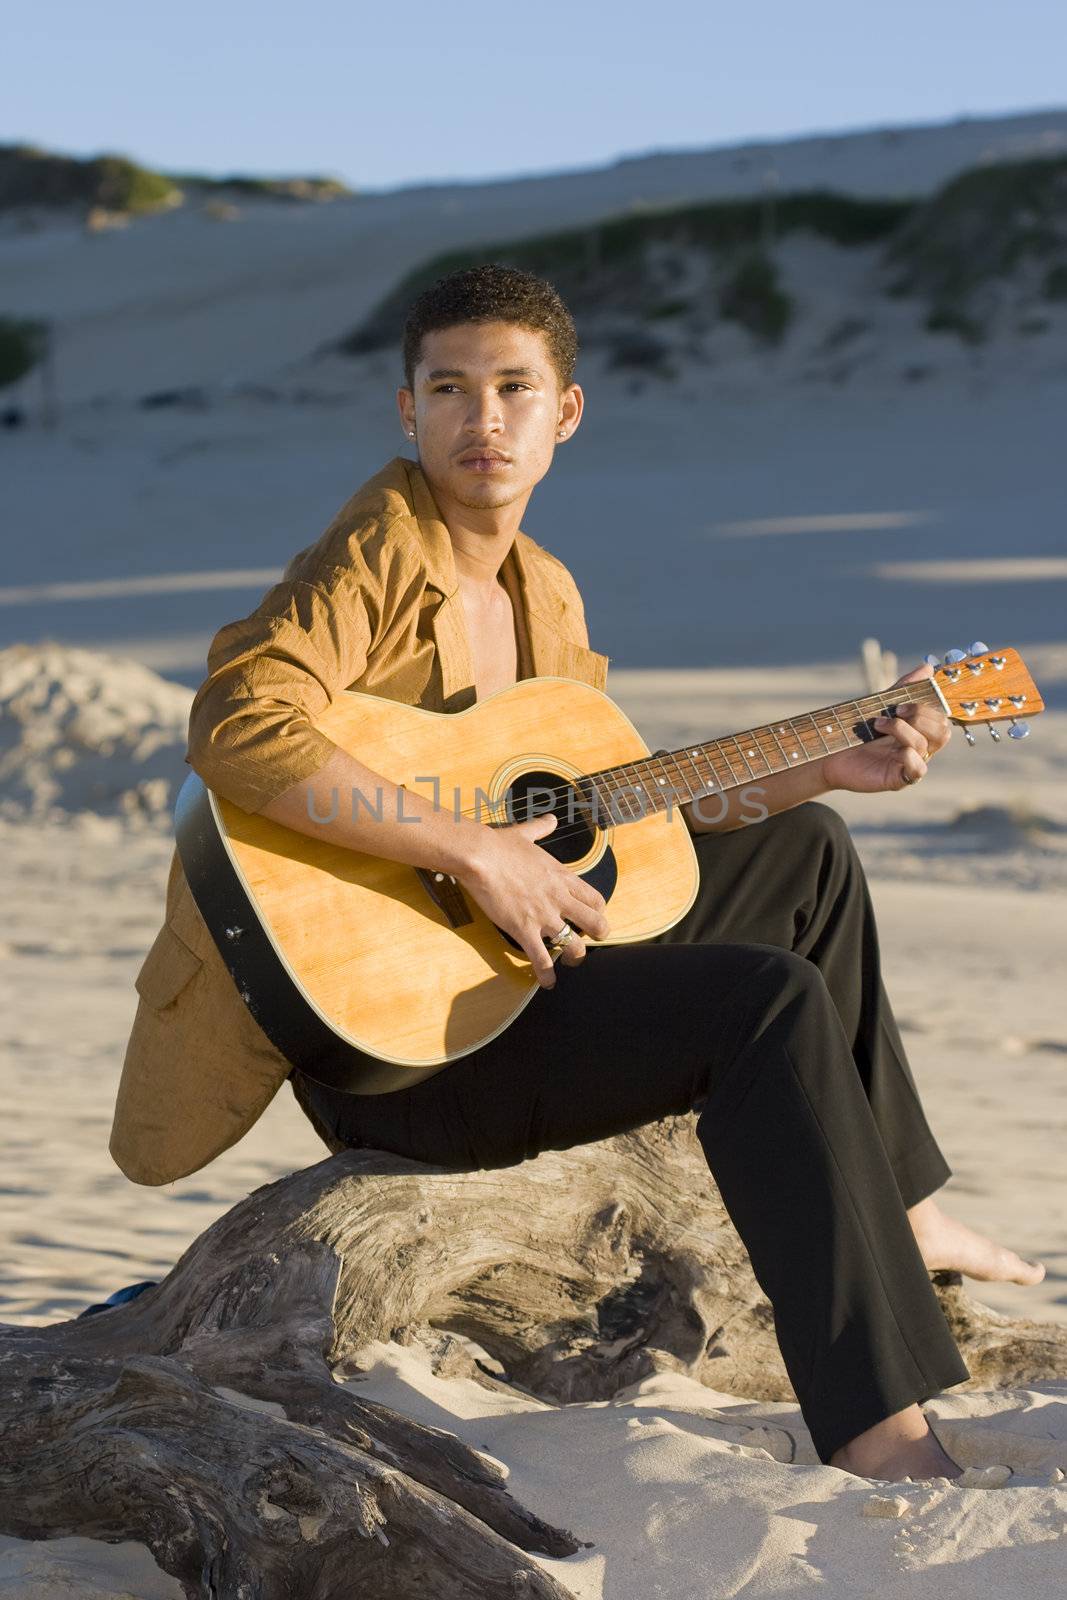 Young man playing his guitar on the beach